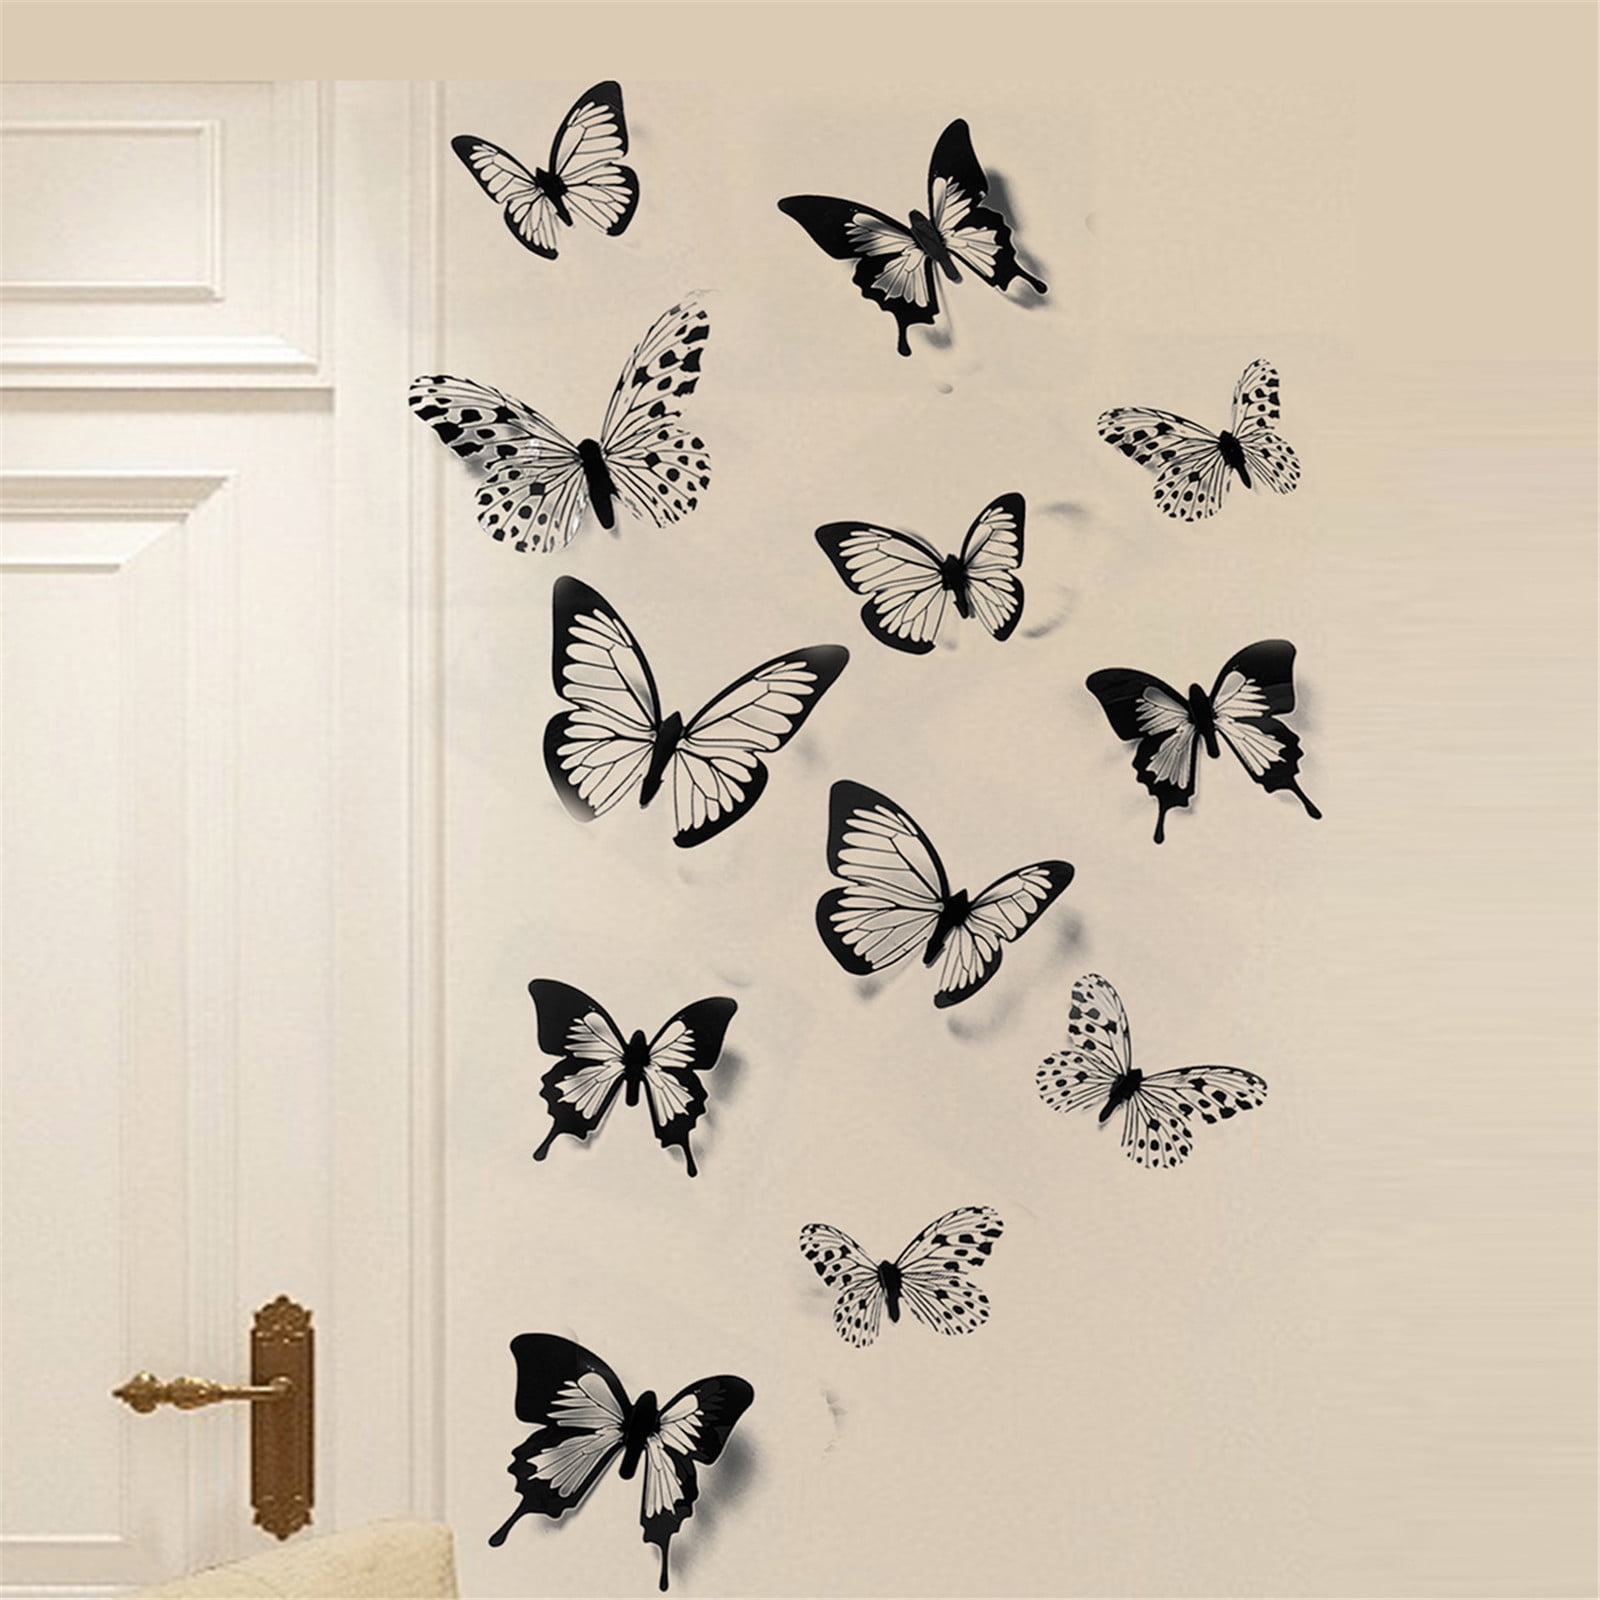 12/24pcs Butterfly Design Wall Stickers 3D Decal Home Room Decorations Decor